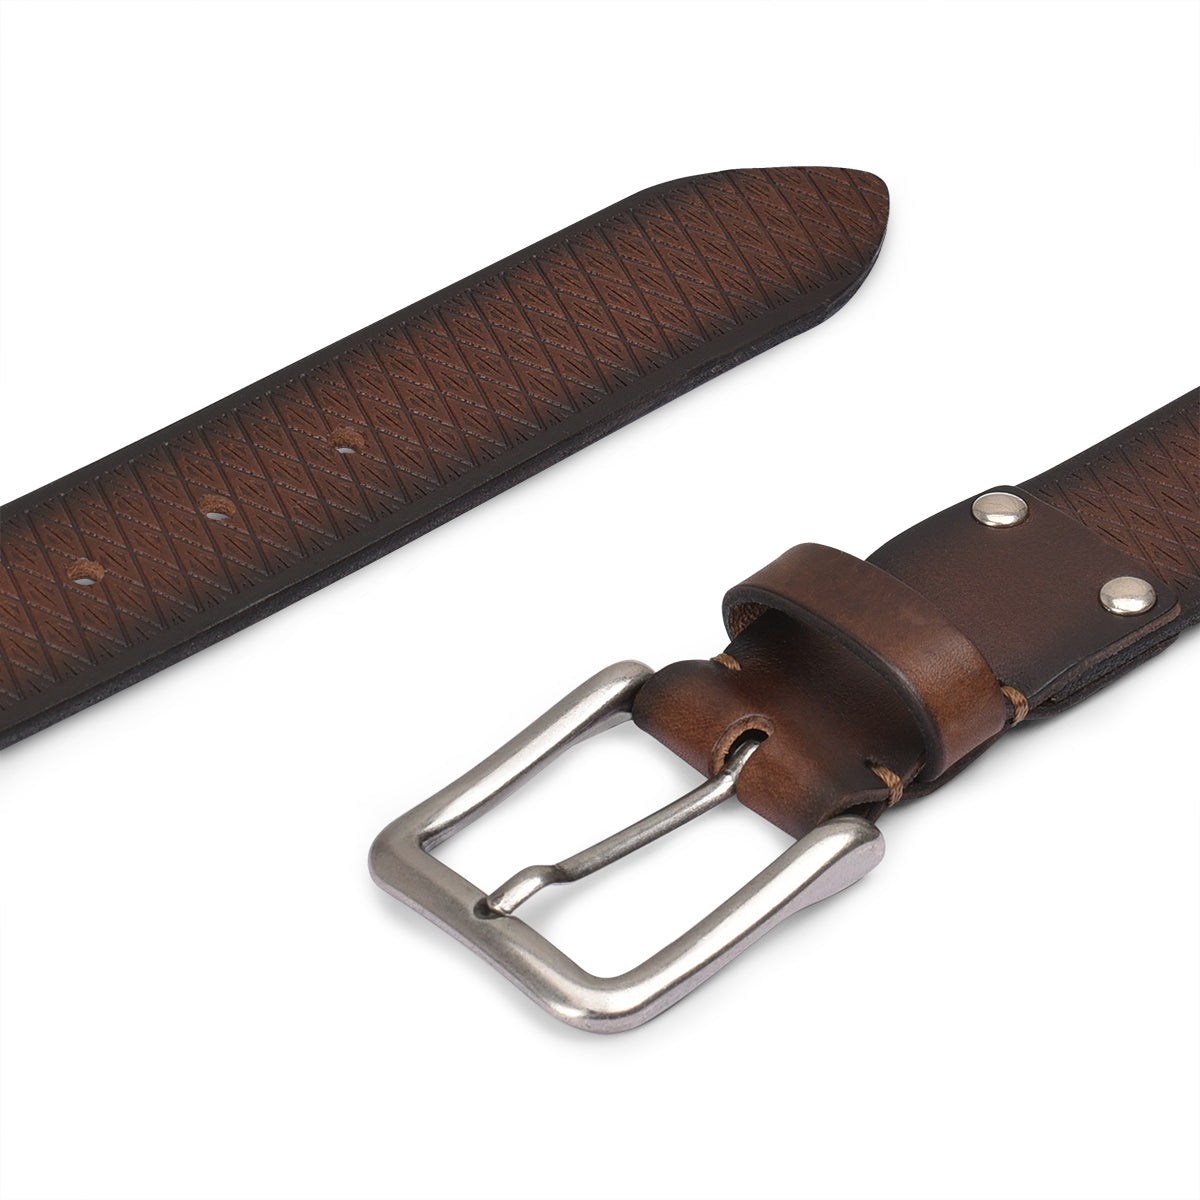 Casual brown leather belt with geometrical engraved